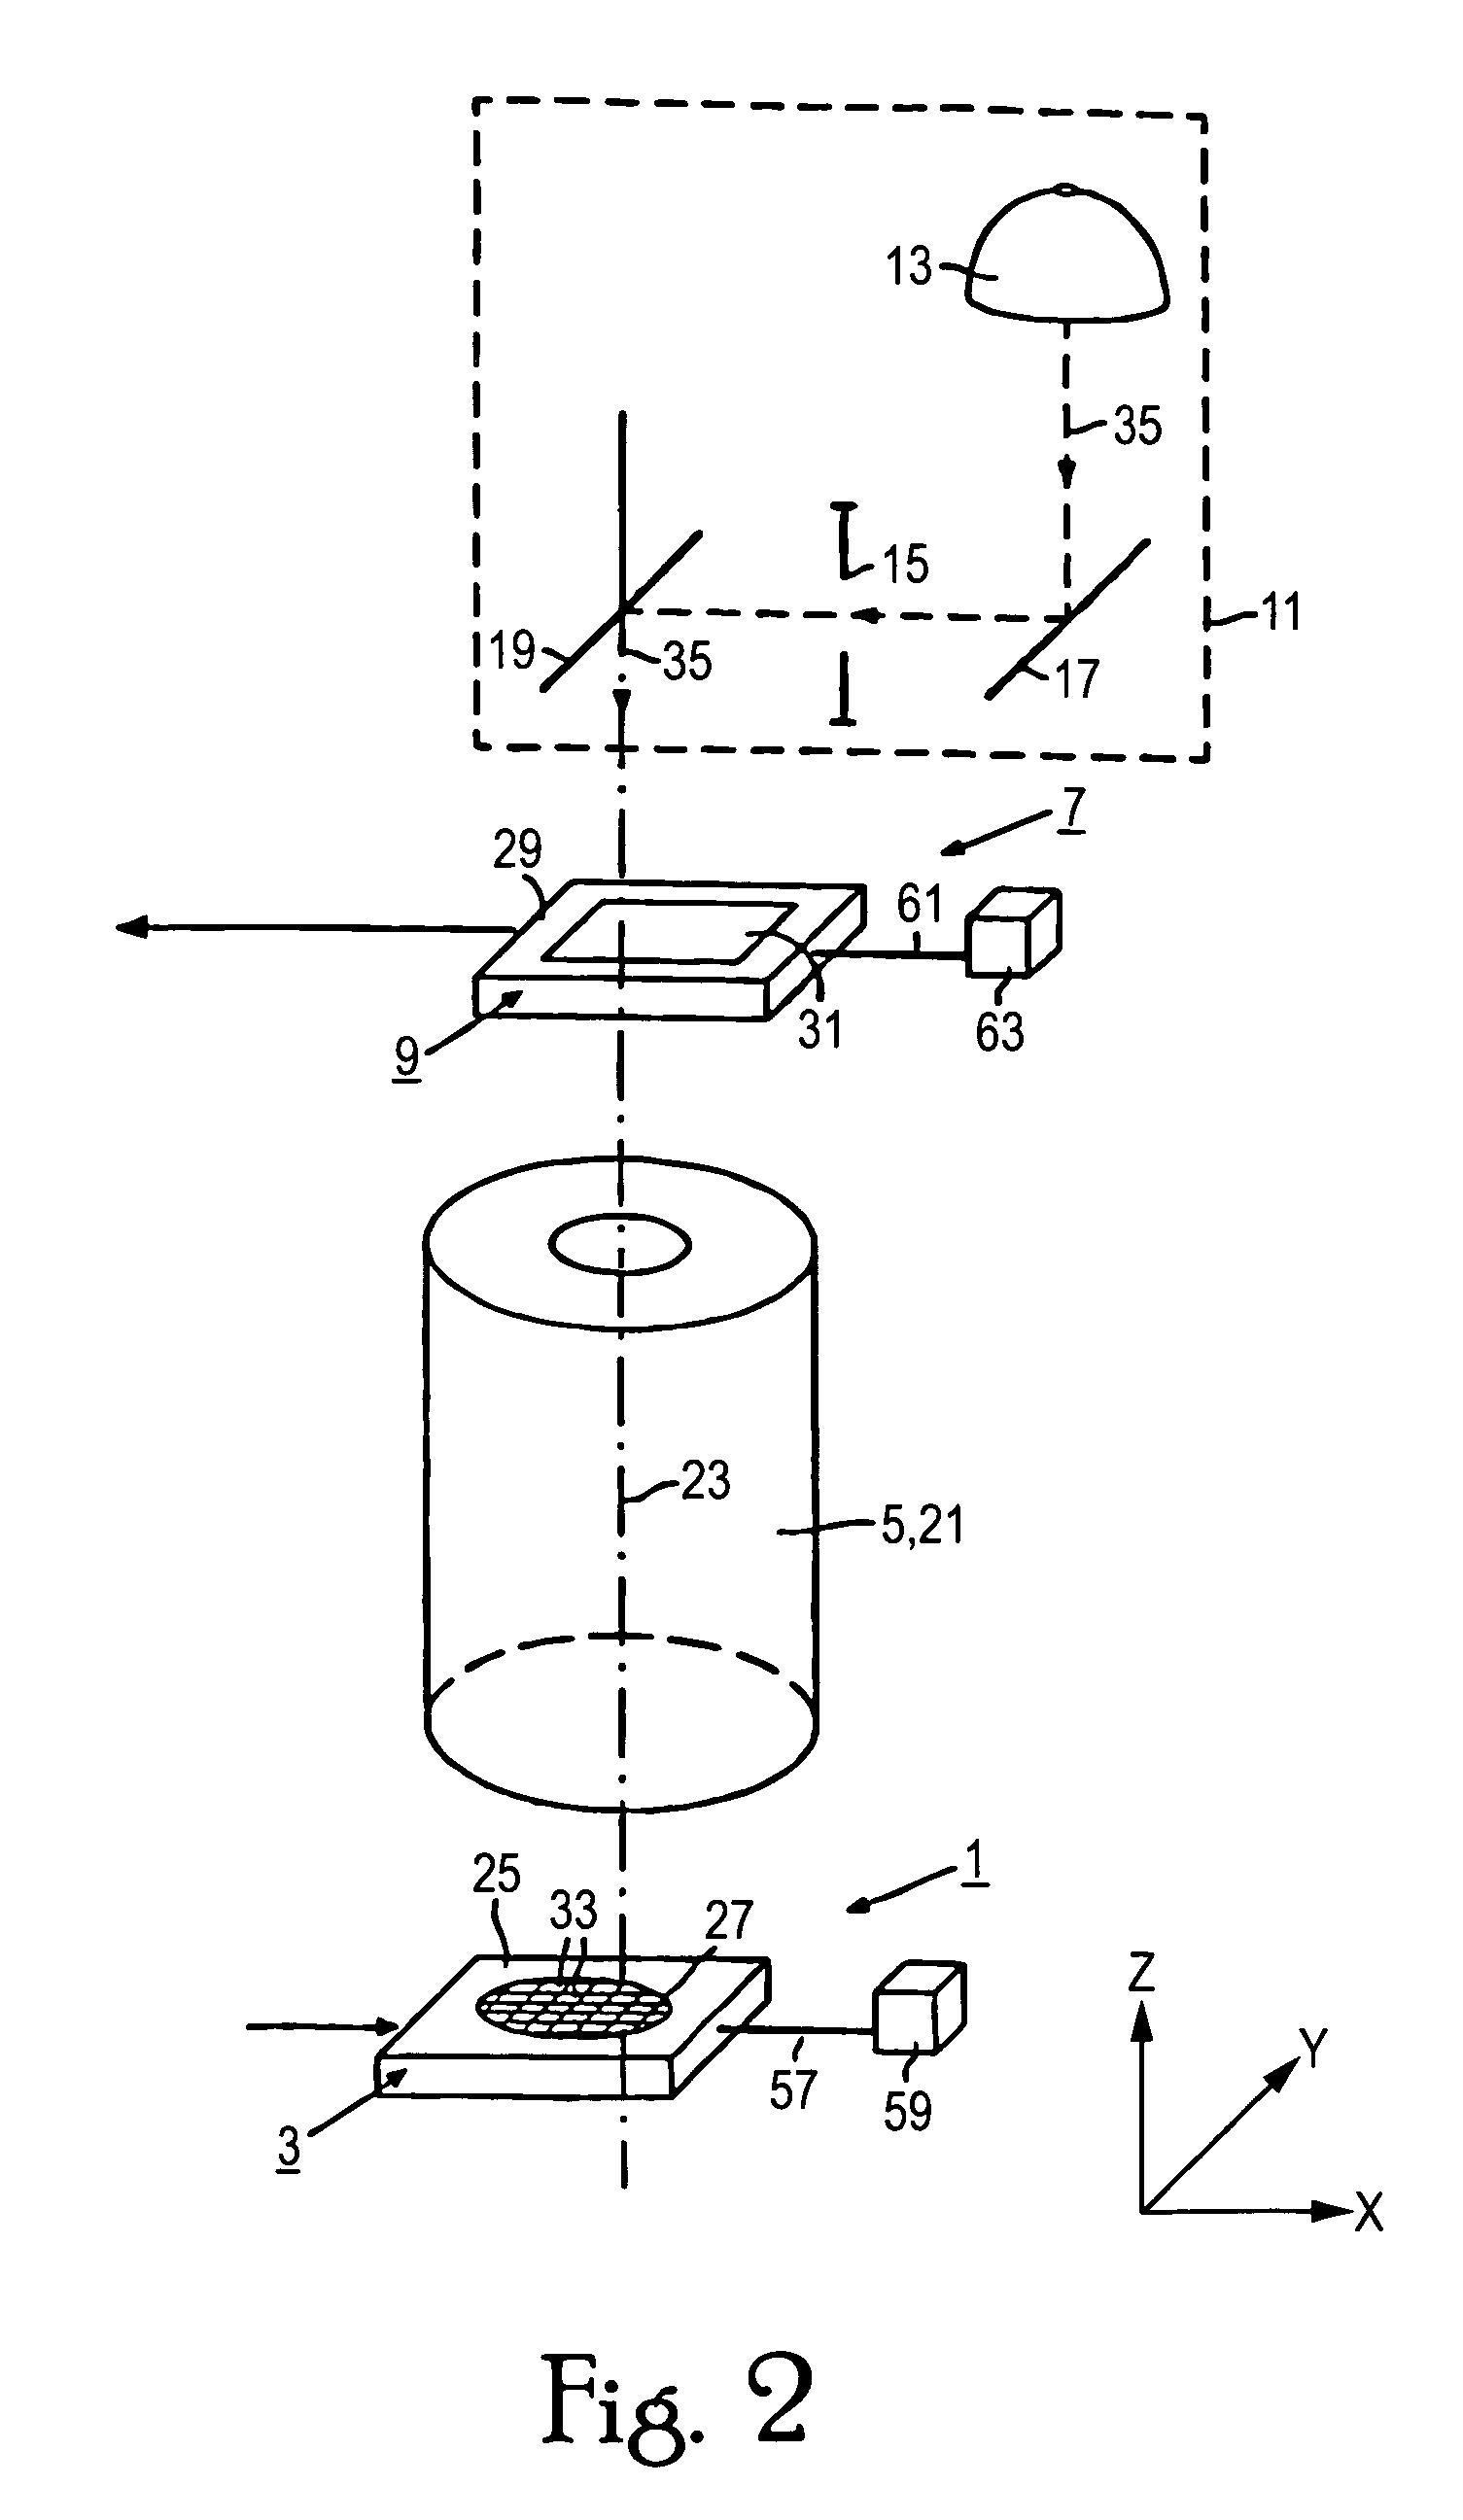 Supporting device, lithographic apparatus, and device manufacturing method employing a supporting device, and a position control system arranged for use in a supporting device